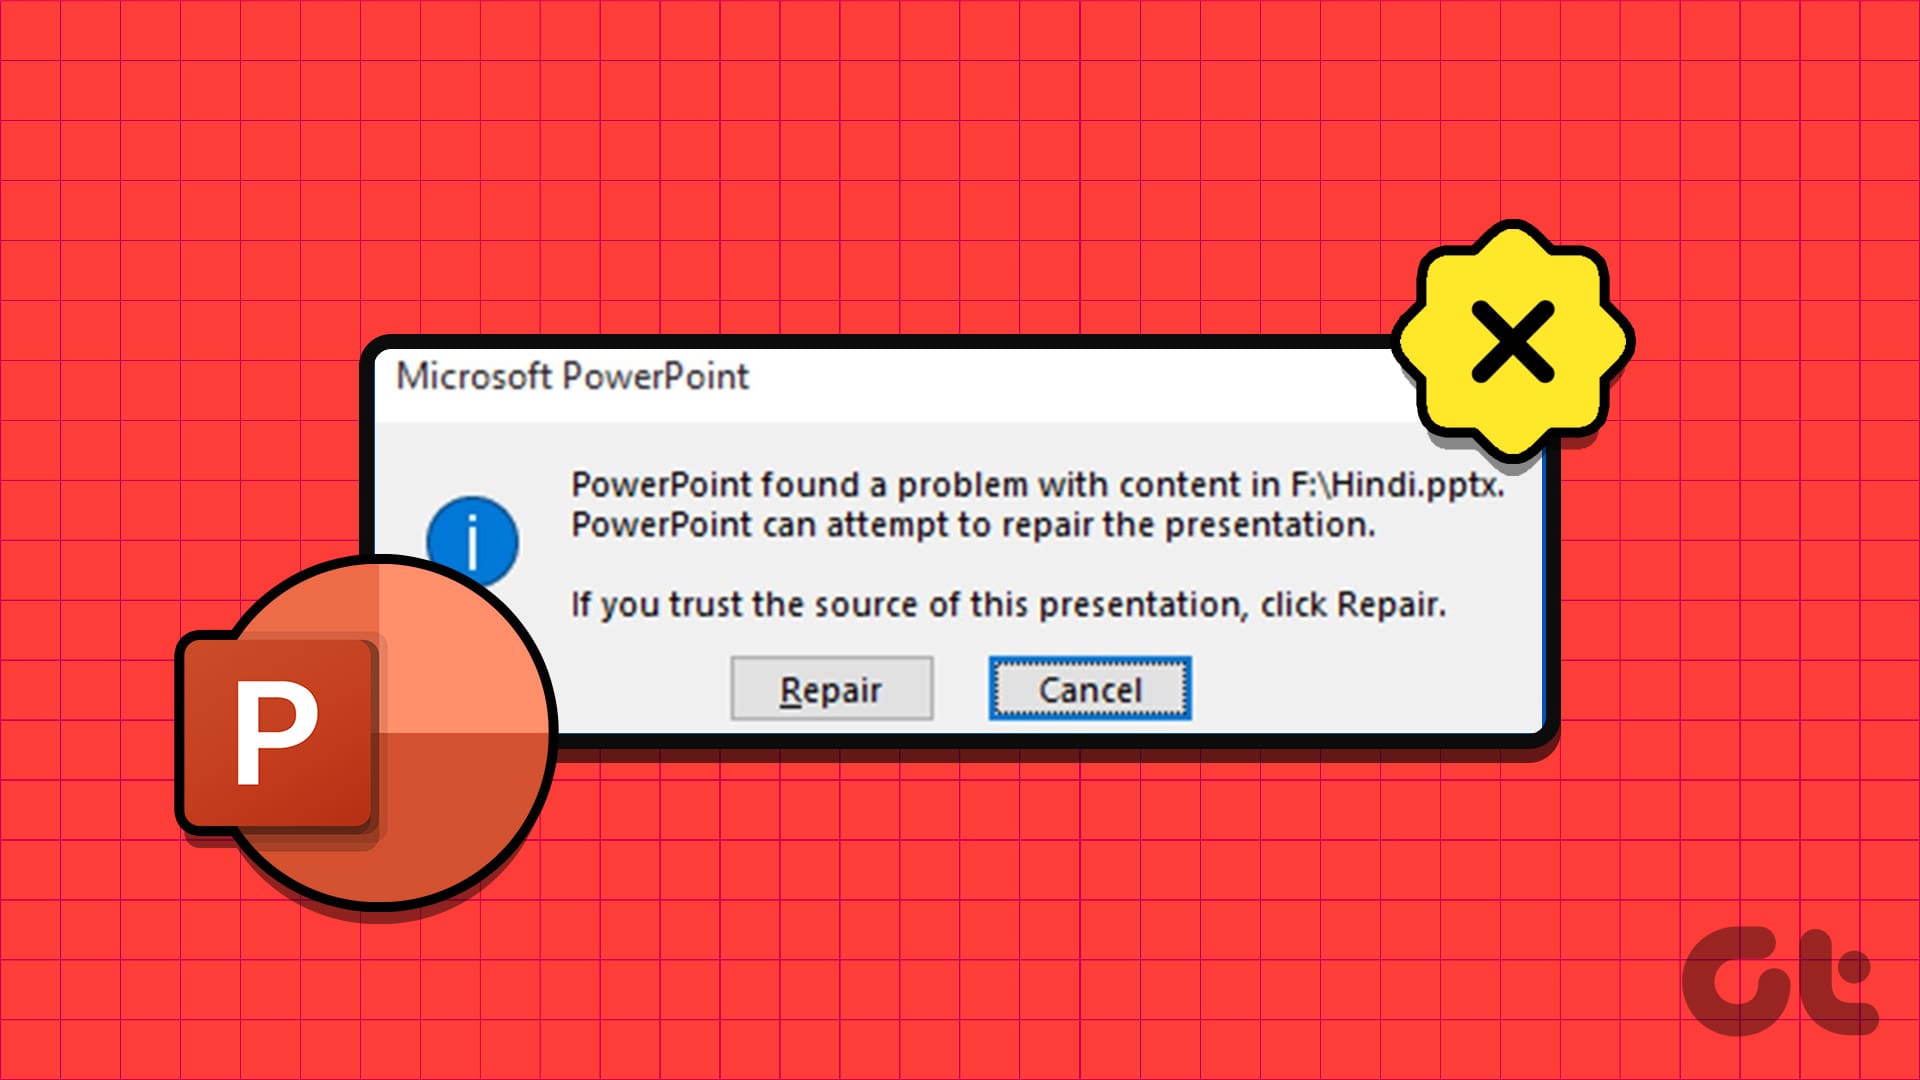 Top Ways to Fix PowerPoint Found a Problem With Content on Windows